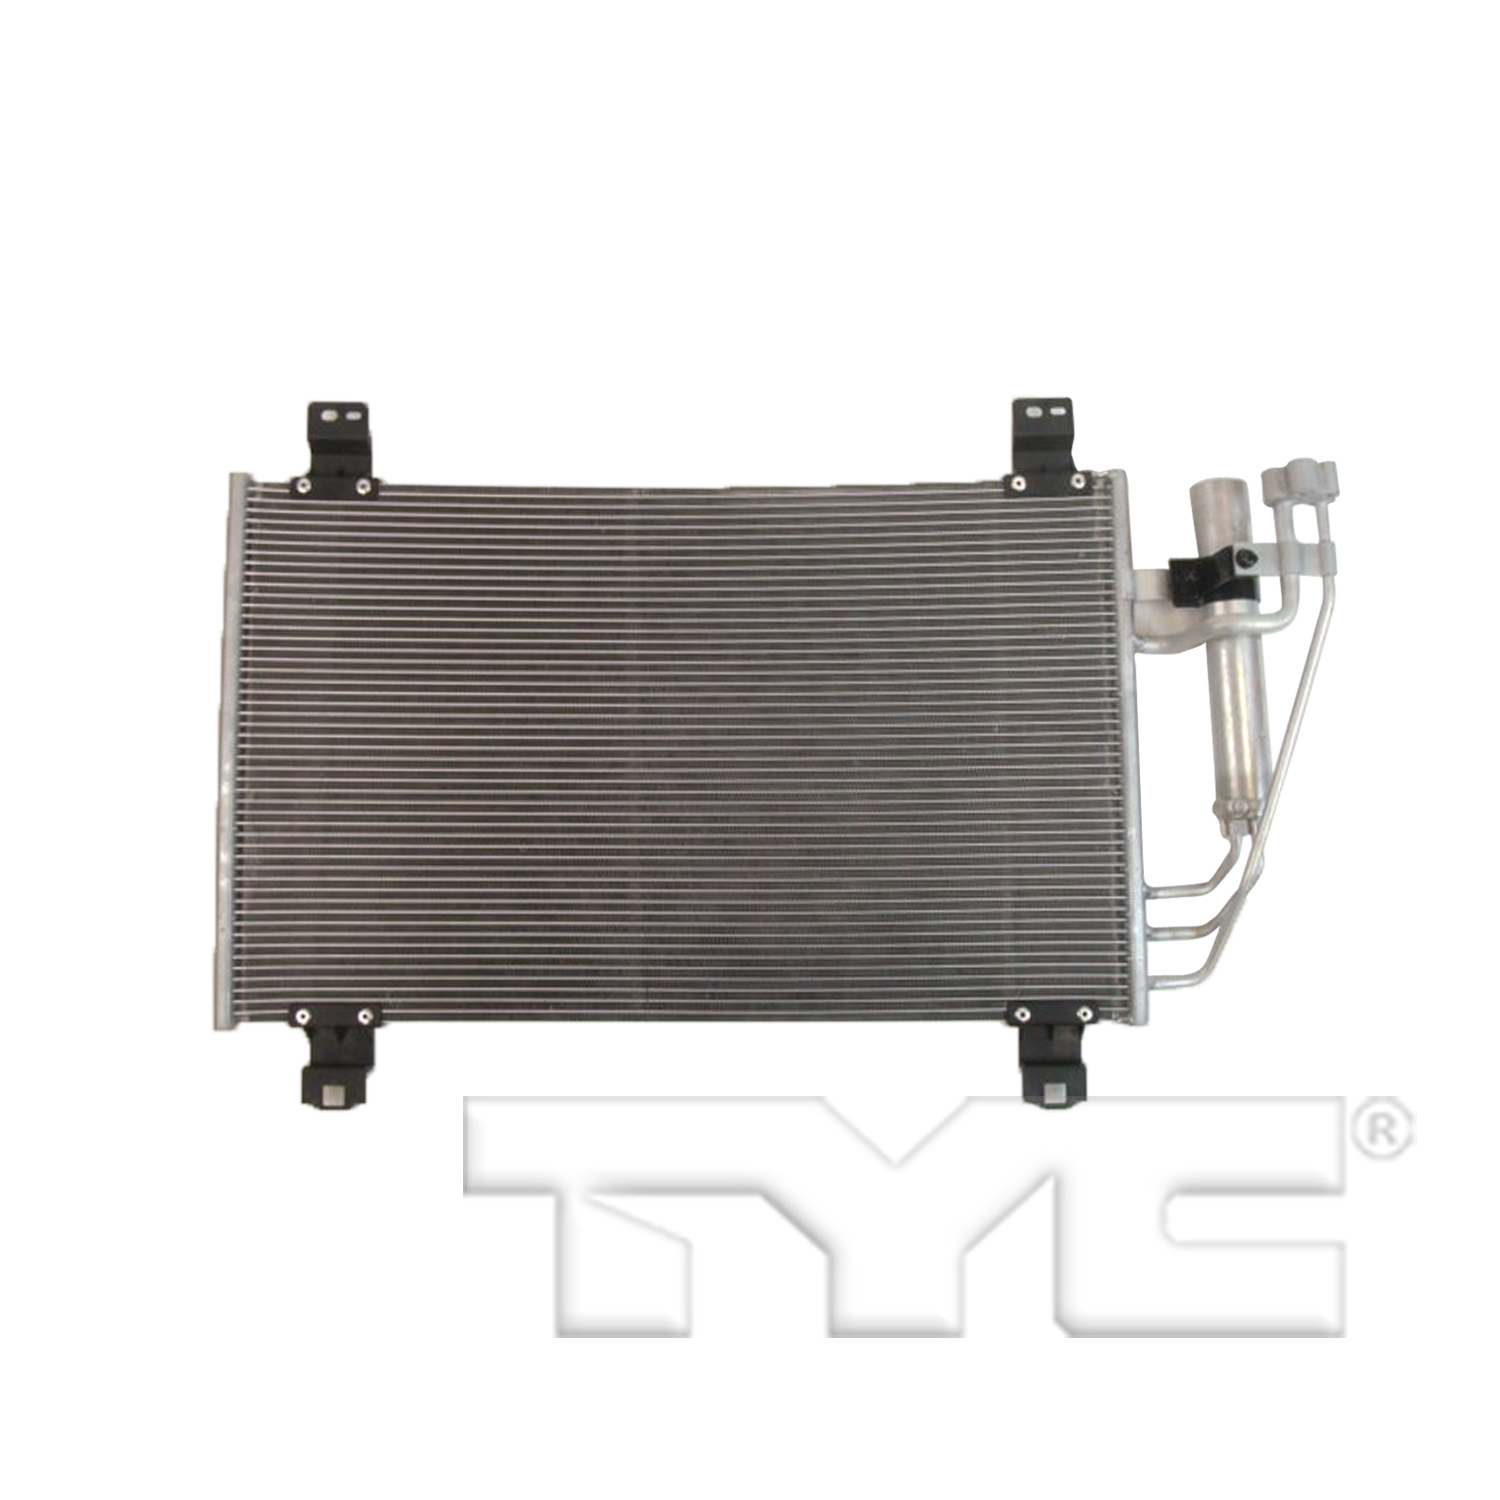 Aftermarket AC CONDENSERS for TOYOTA - YARIS, YARIS,16-20,Air conditioning condenser